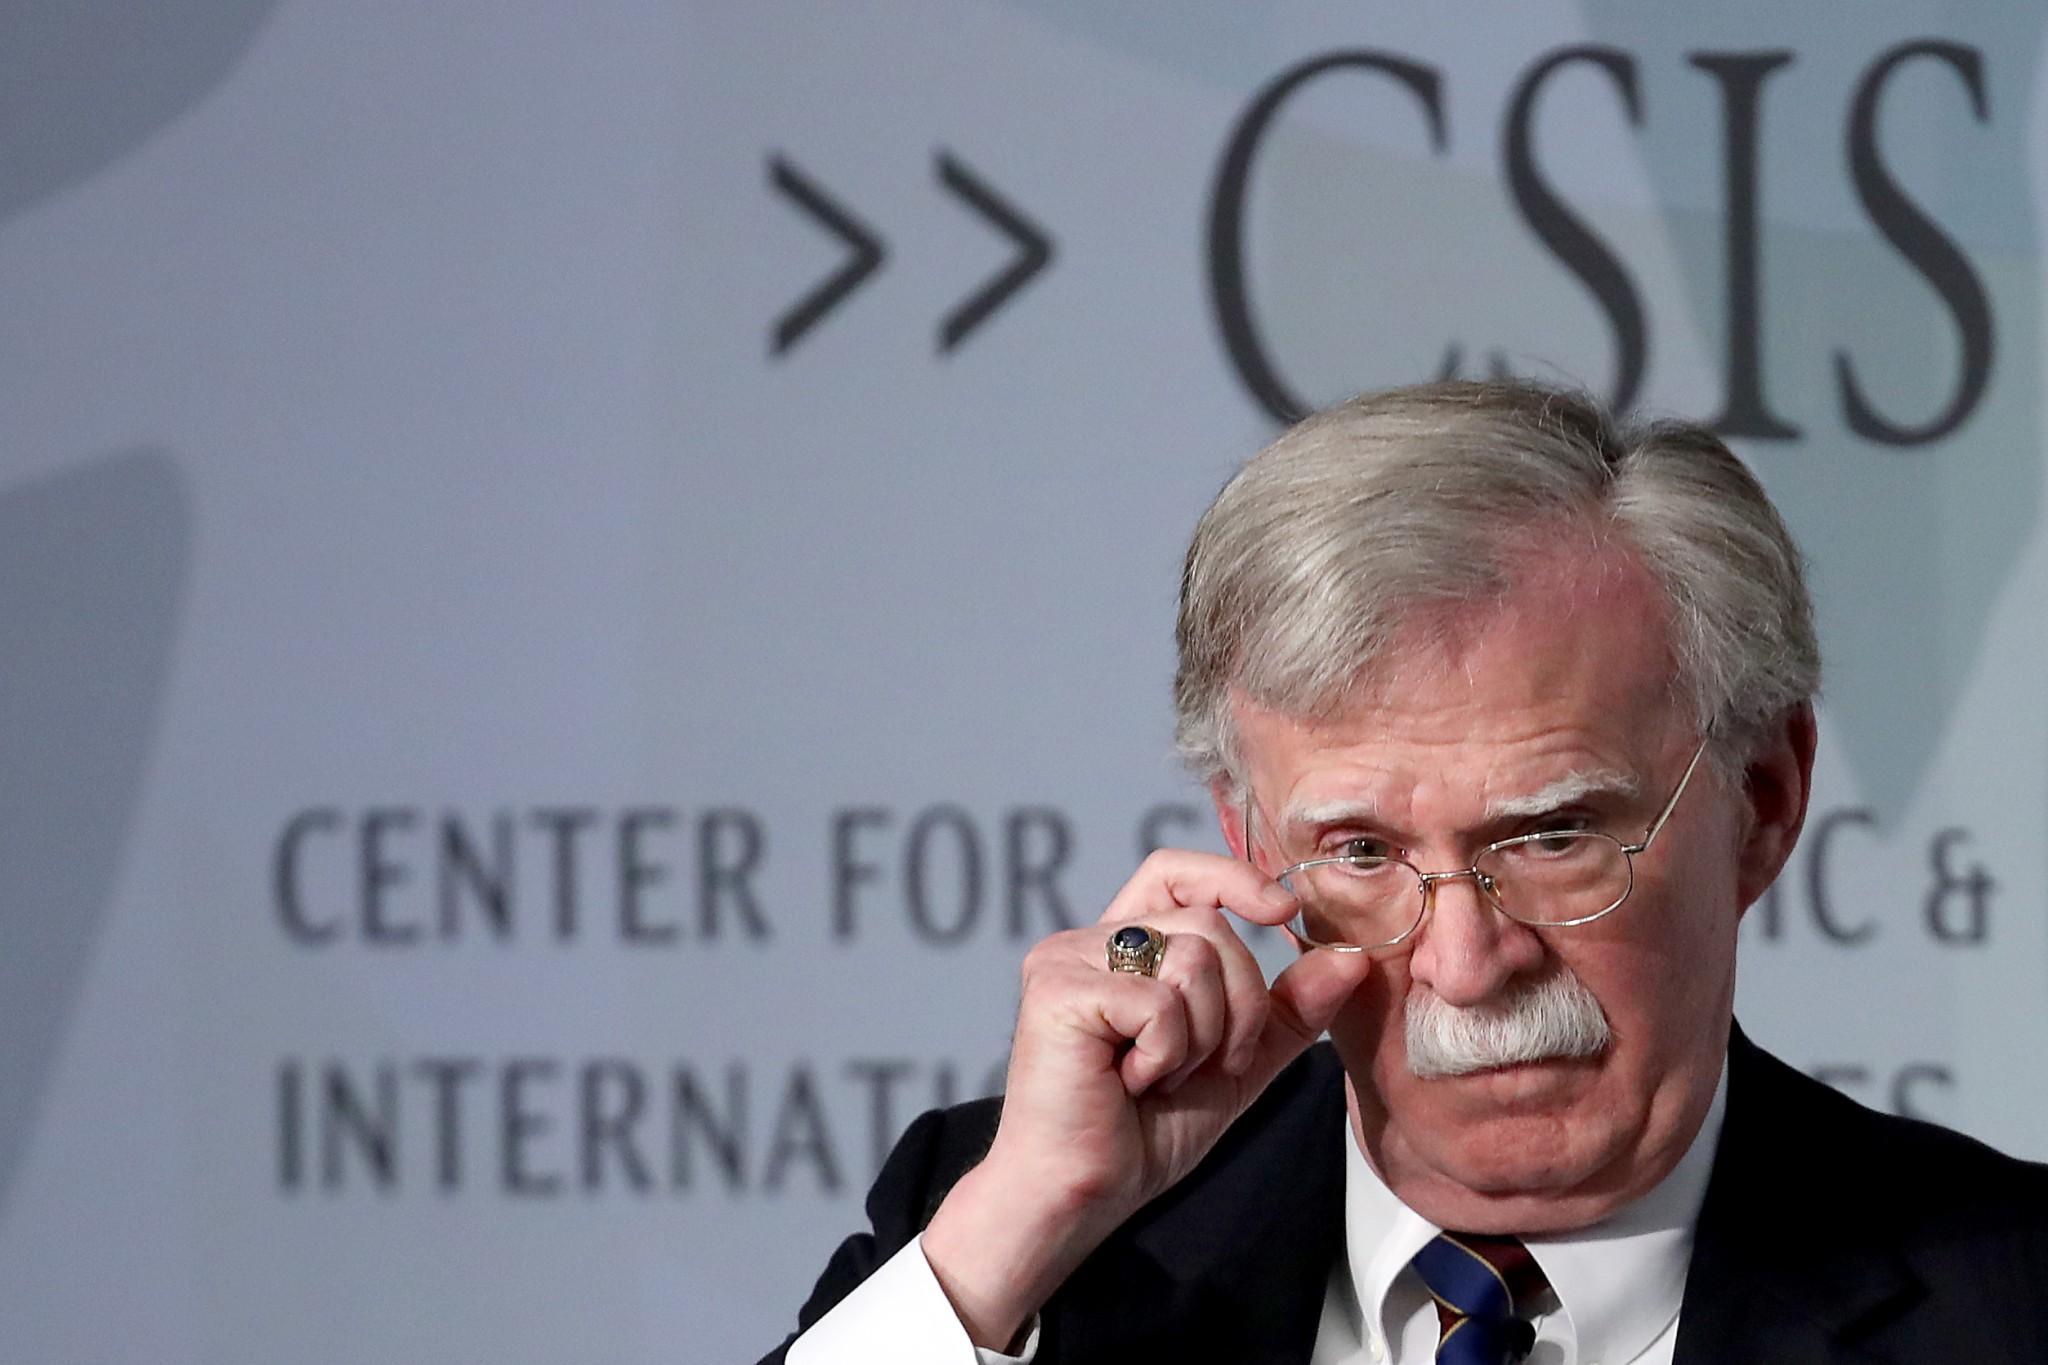 In his new book, Bolton says delay in releasing $400m in security assistance for Ukraine last summer was an attempt by Trump to get damaging material about Hillary Clinton and Joe Biden